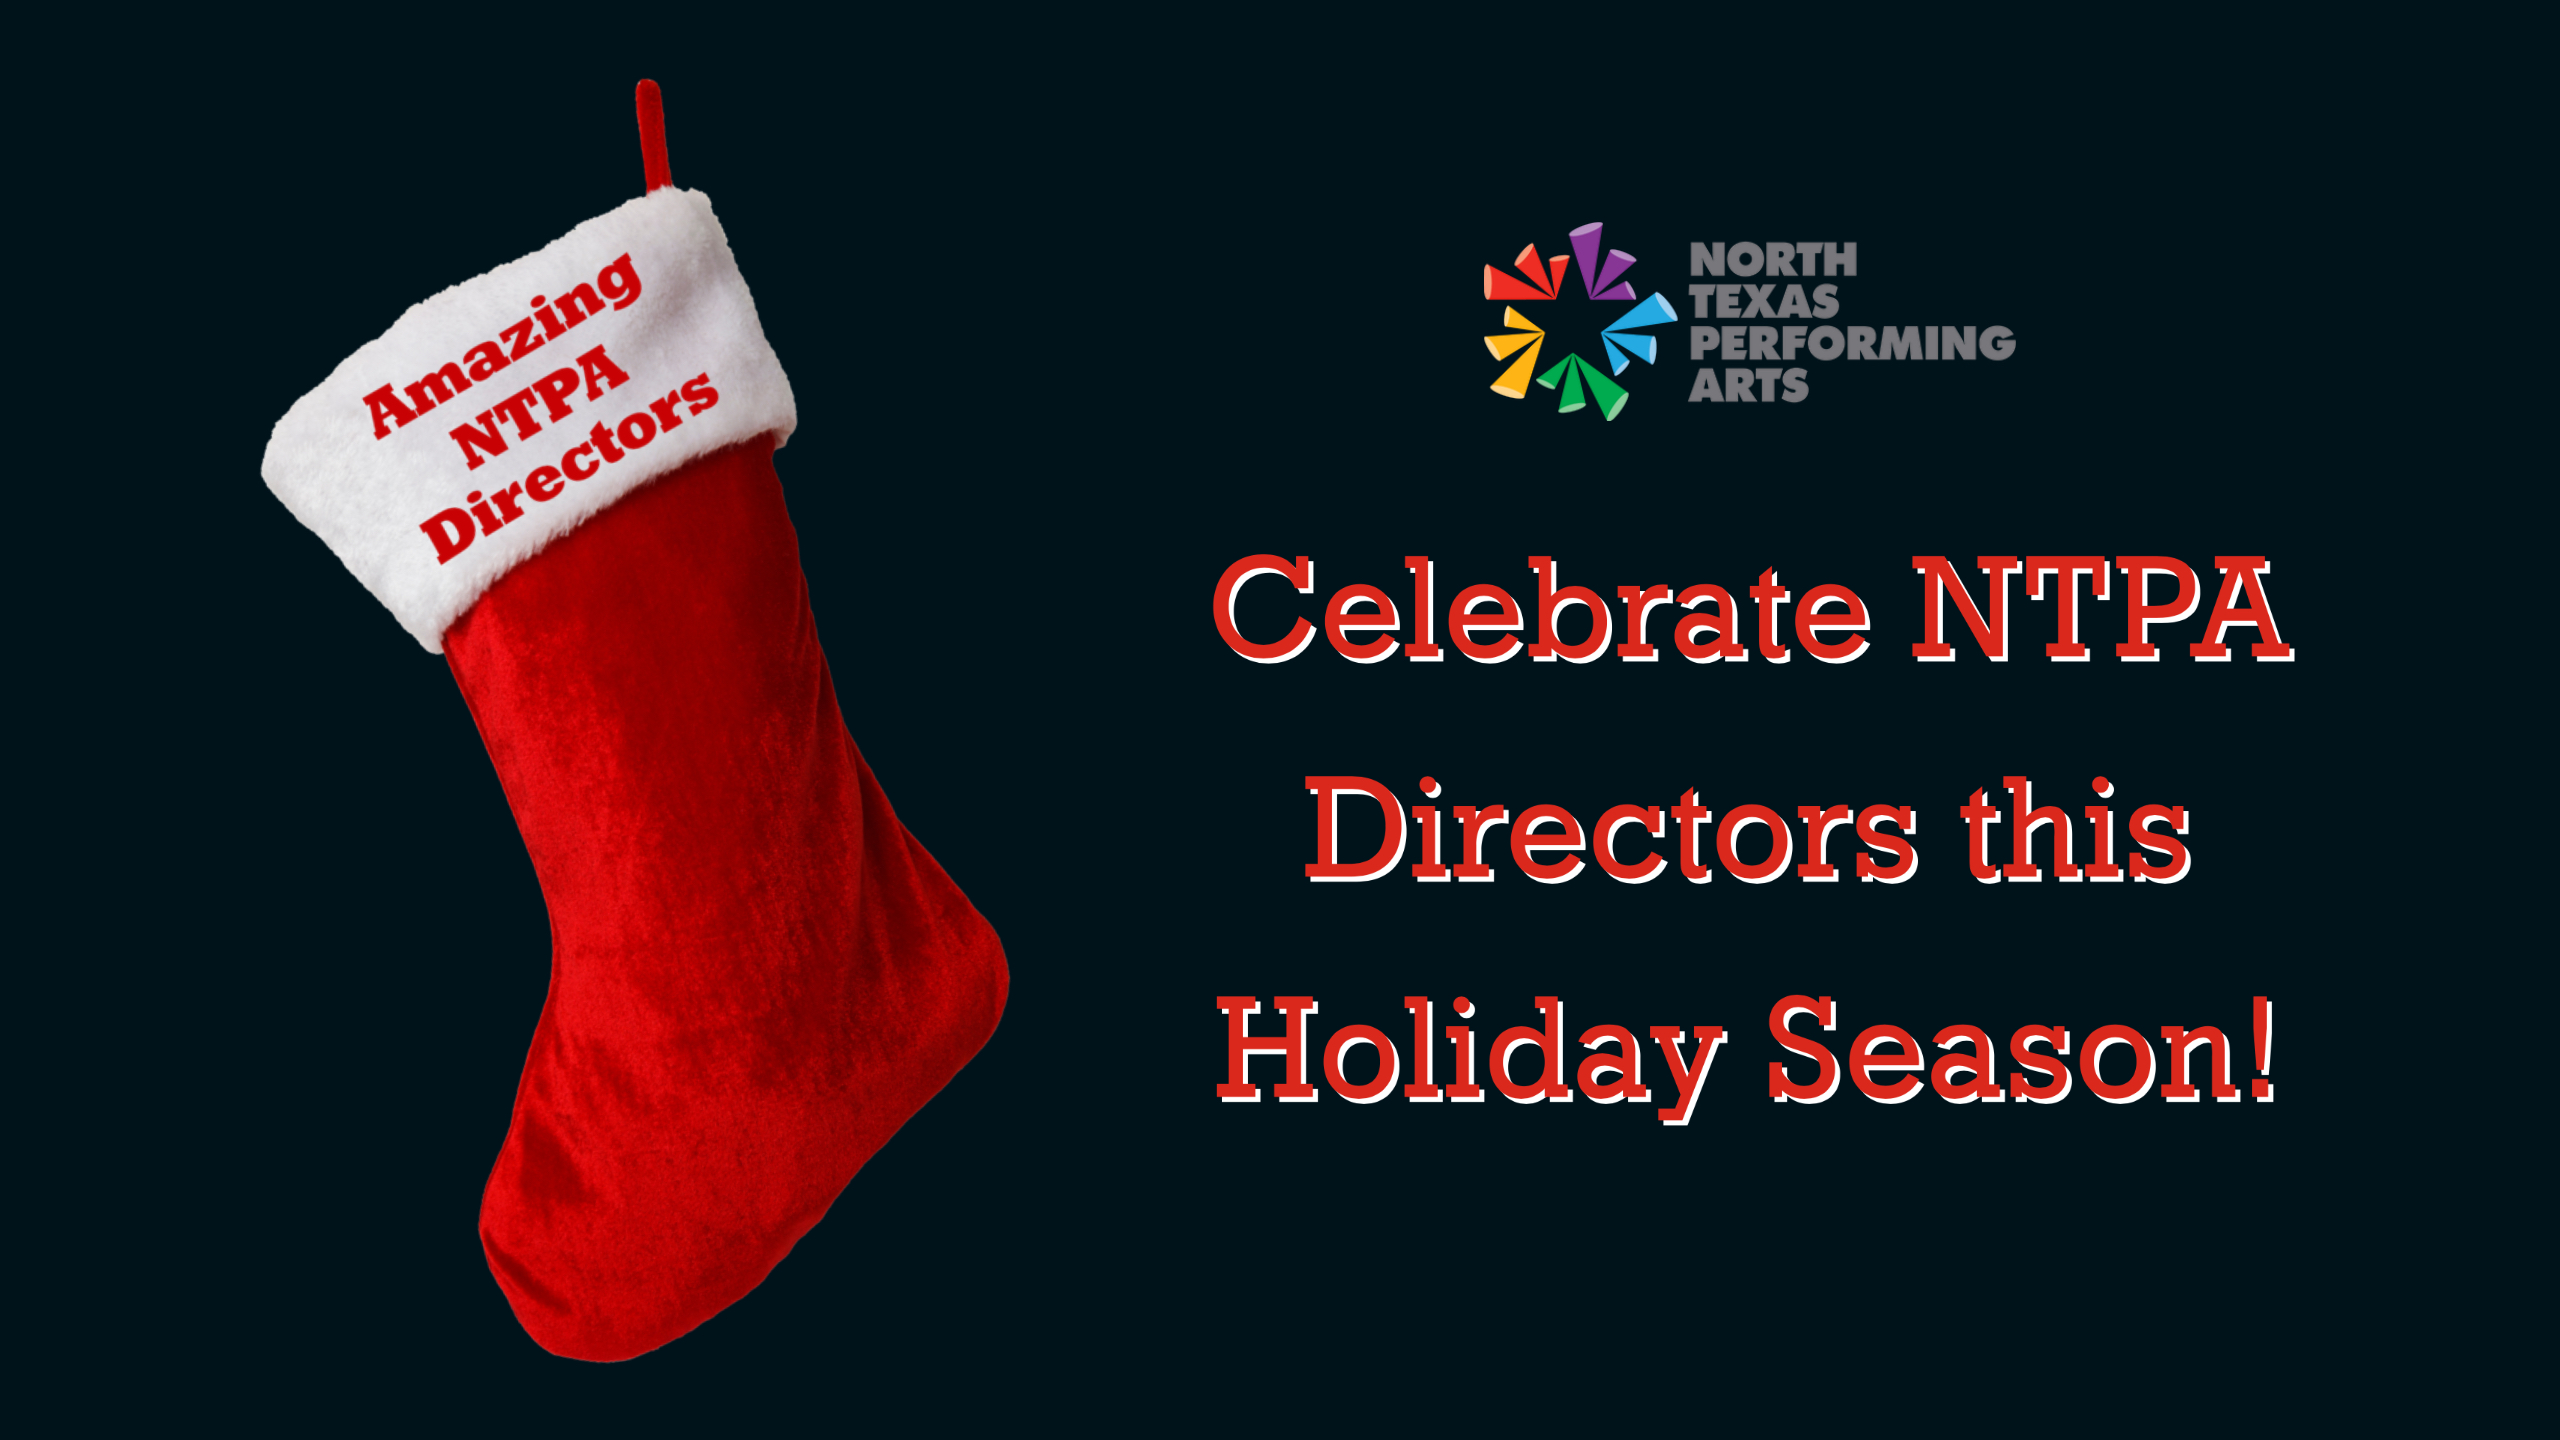 help us celebrate our NTPA directors this holiday season